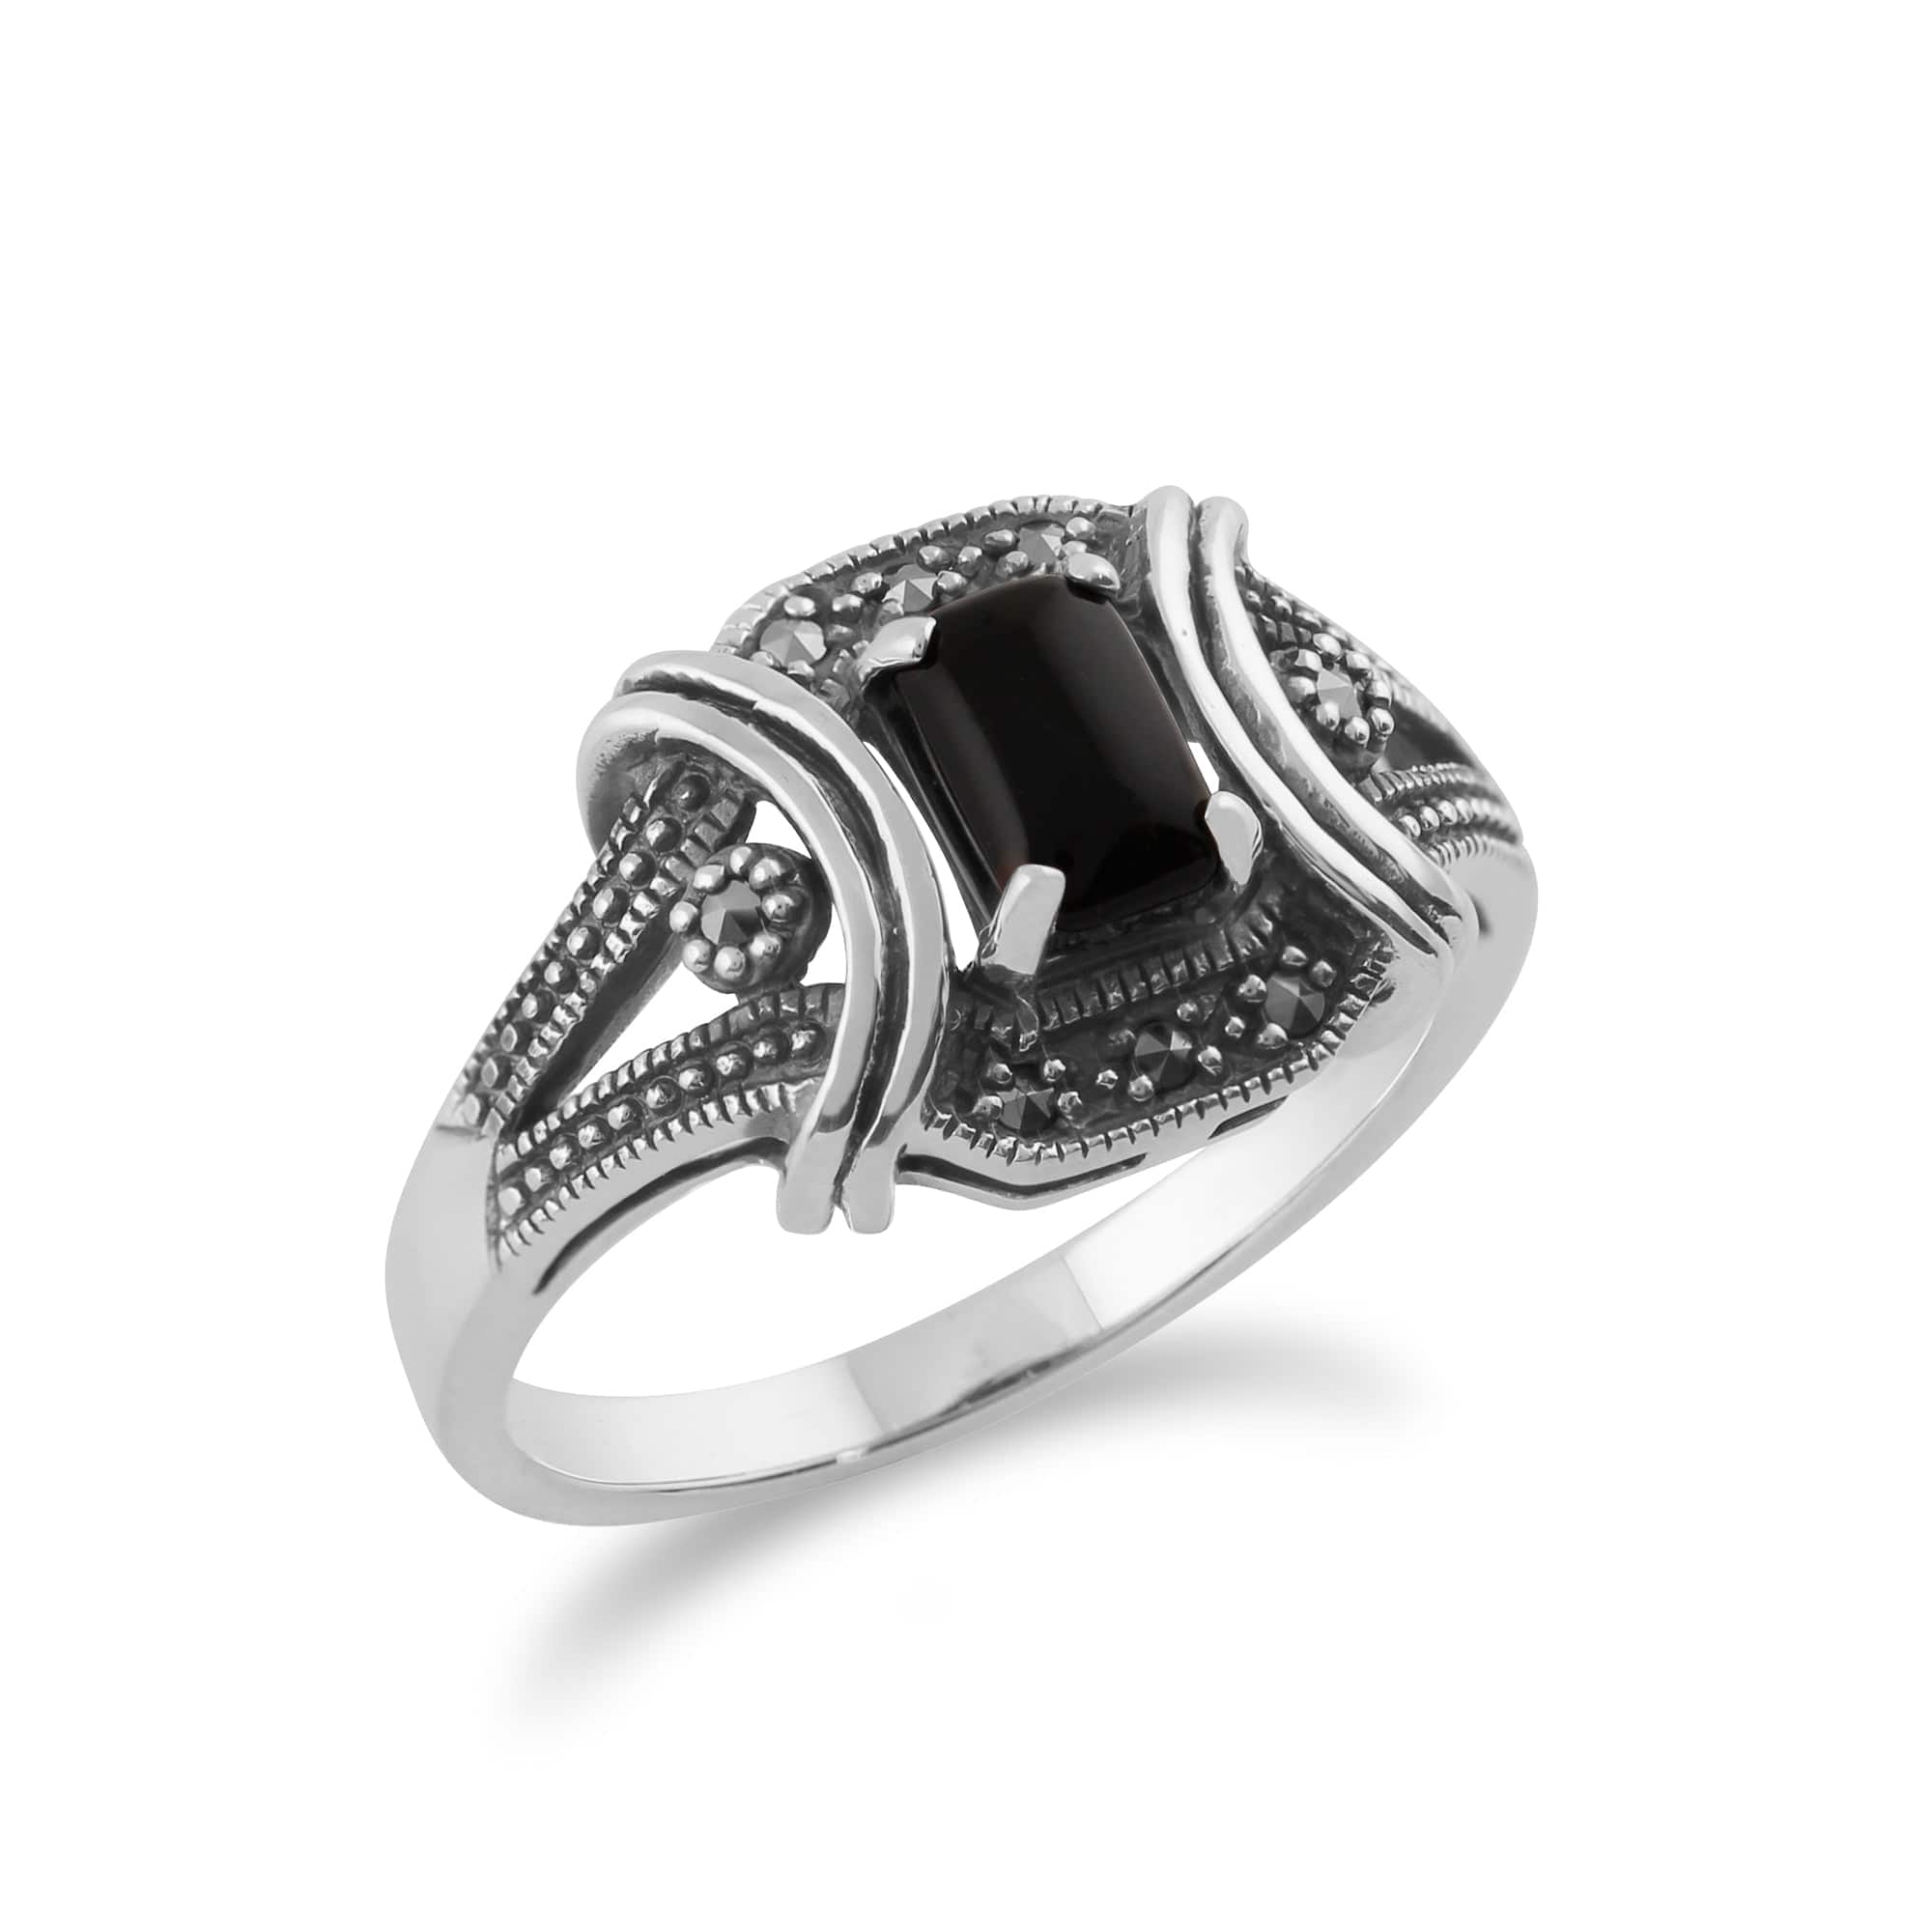 214R586801925 Art Deco Style Black Onyx Cabochon & Marcasite Ring in 925 Sterling Silver 2